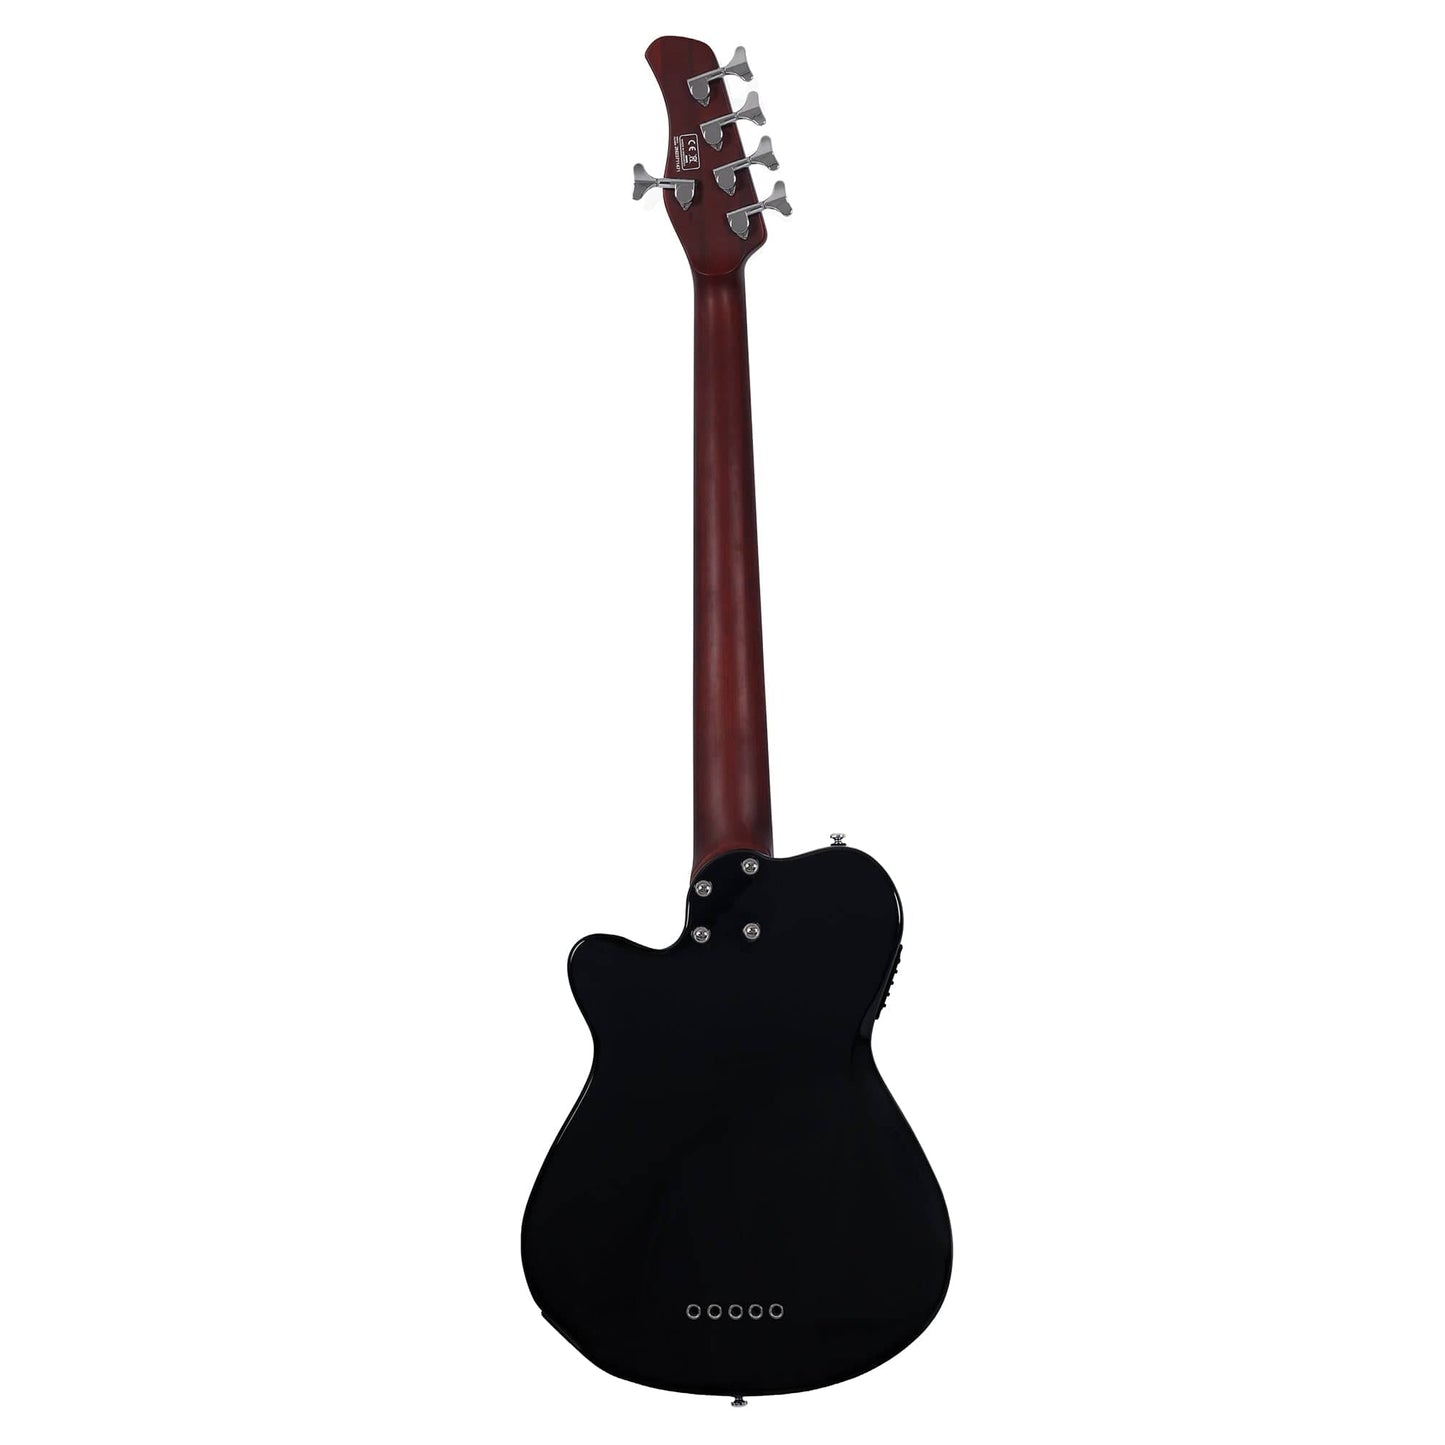 Sire Marcus Miller GB5 5-String Acoustic Bass Black Bass Guitars / 5-String or More